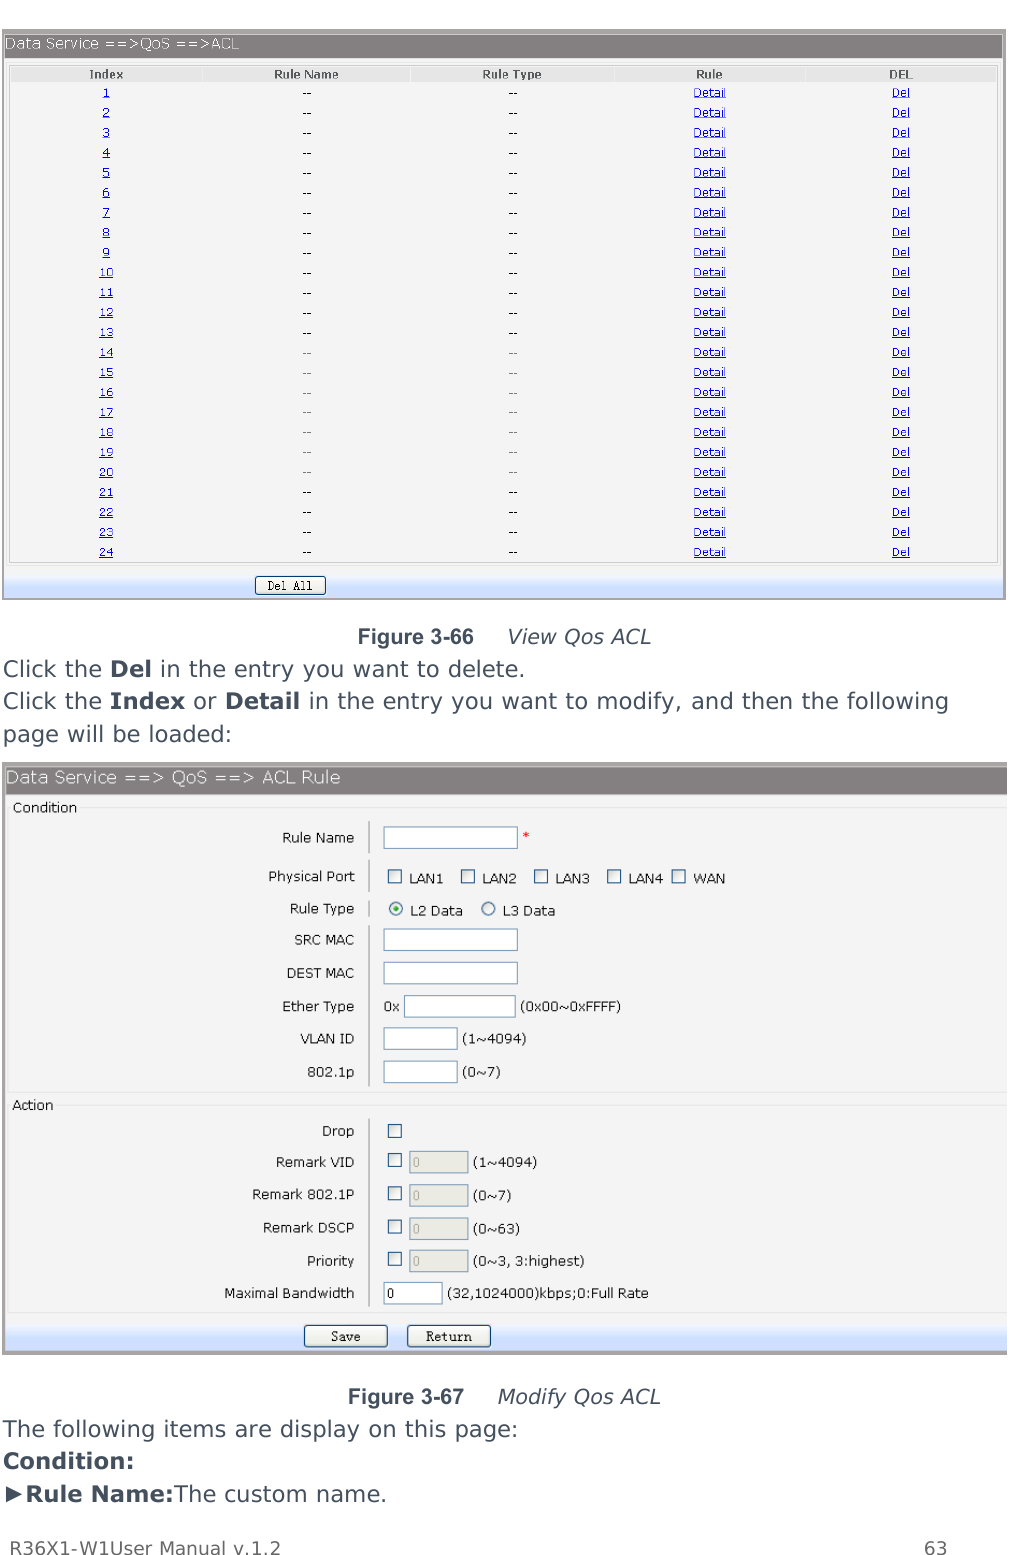           R36X1-W1User Manual v.1.2    63   Figure 3-66  View Qos ACL Click the Del in the entry you want to delete. Click the Index or Detail in the entry you want to modify, and then the following page will be loaded:  Figure 3-67  Modify Qos ACL The following items are display on this page: Condition: ►Rule Name:The custom name. 